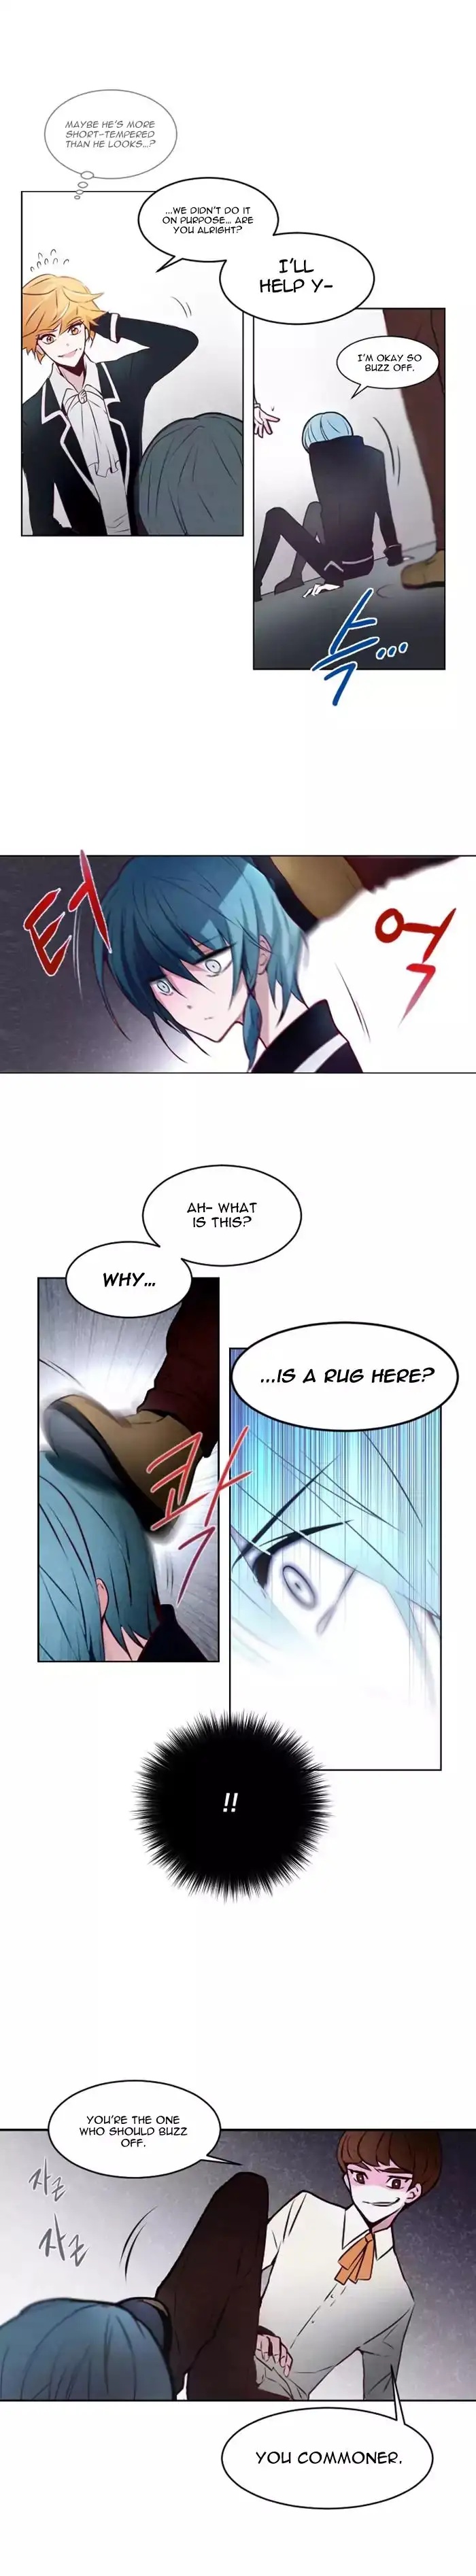 ANZ - Chapter 5 Page 6